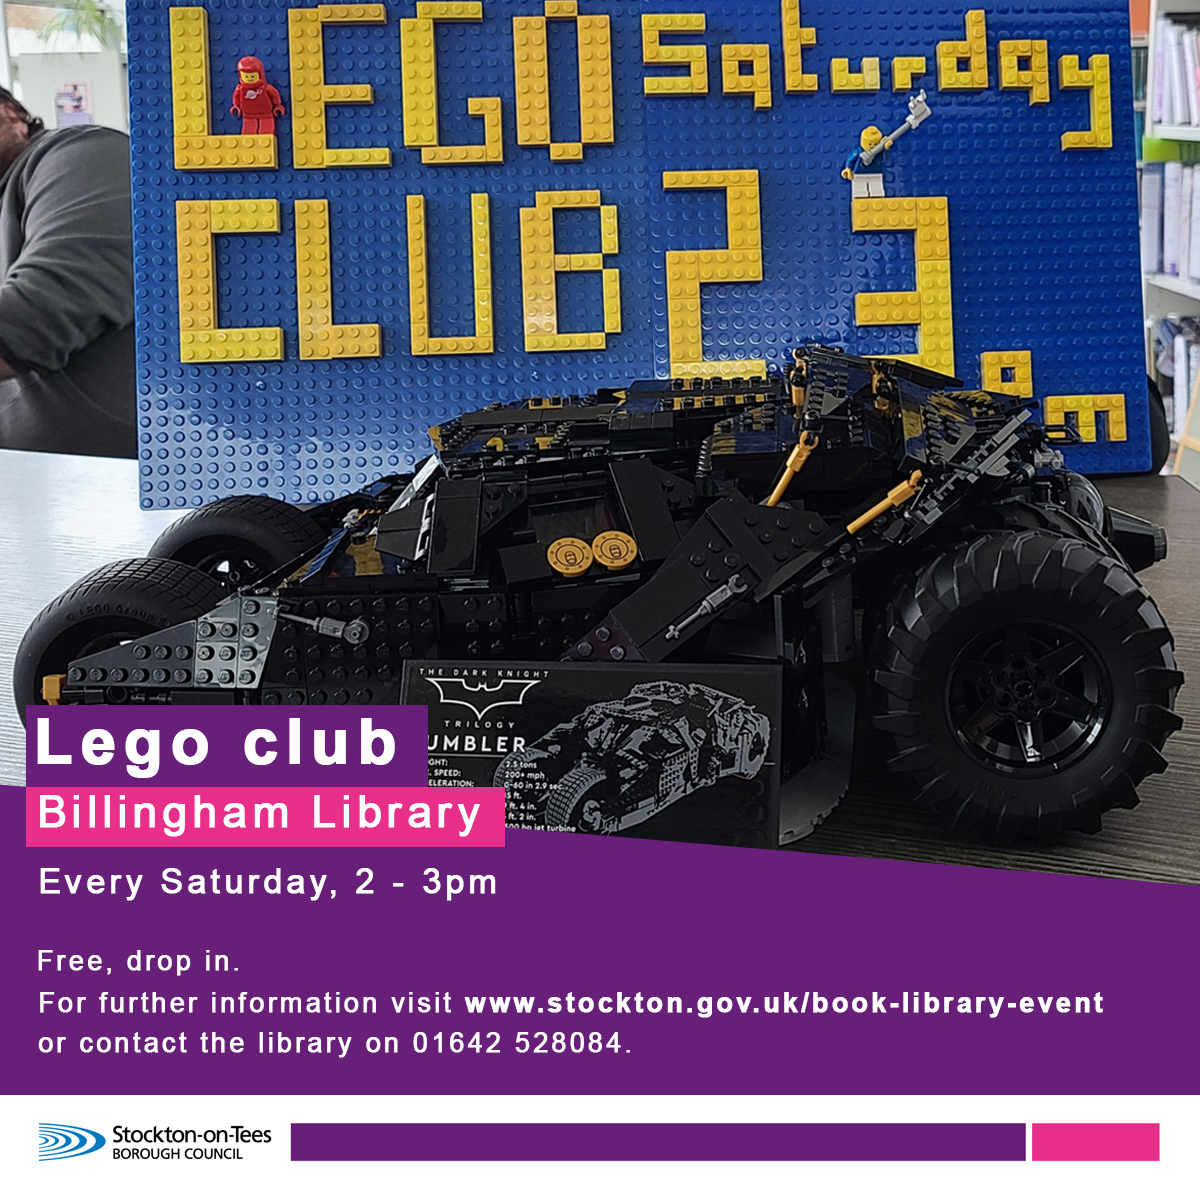 Love Lego? Come and show us what you can build in this fun drop in session, every Saturday at #BillinghamLibrary between 2 - 3pm. Suitable for families and children aged 4+. For further information contact the library on 01642 528084.